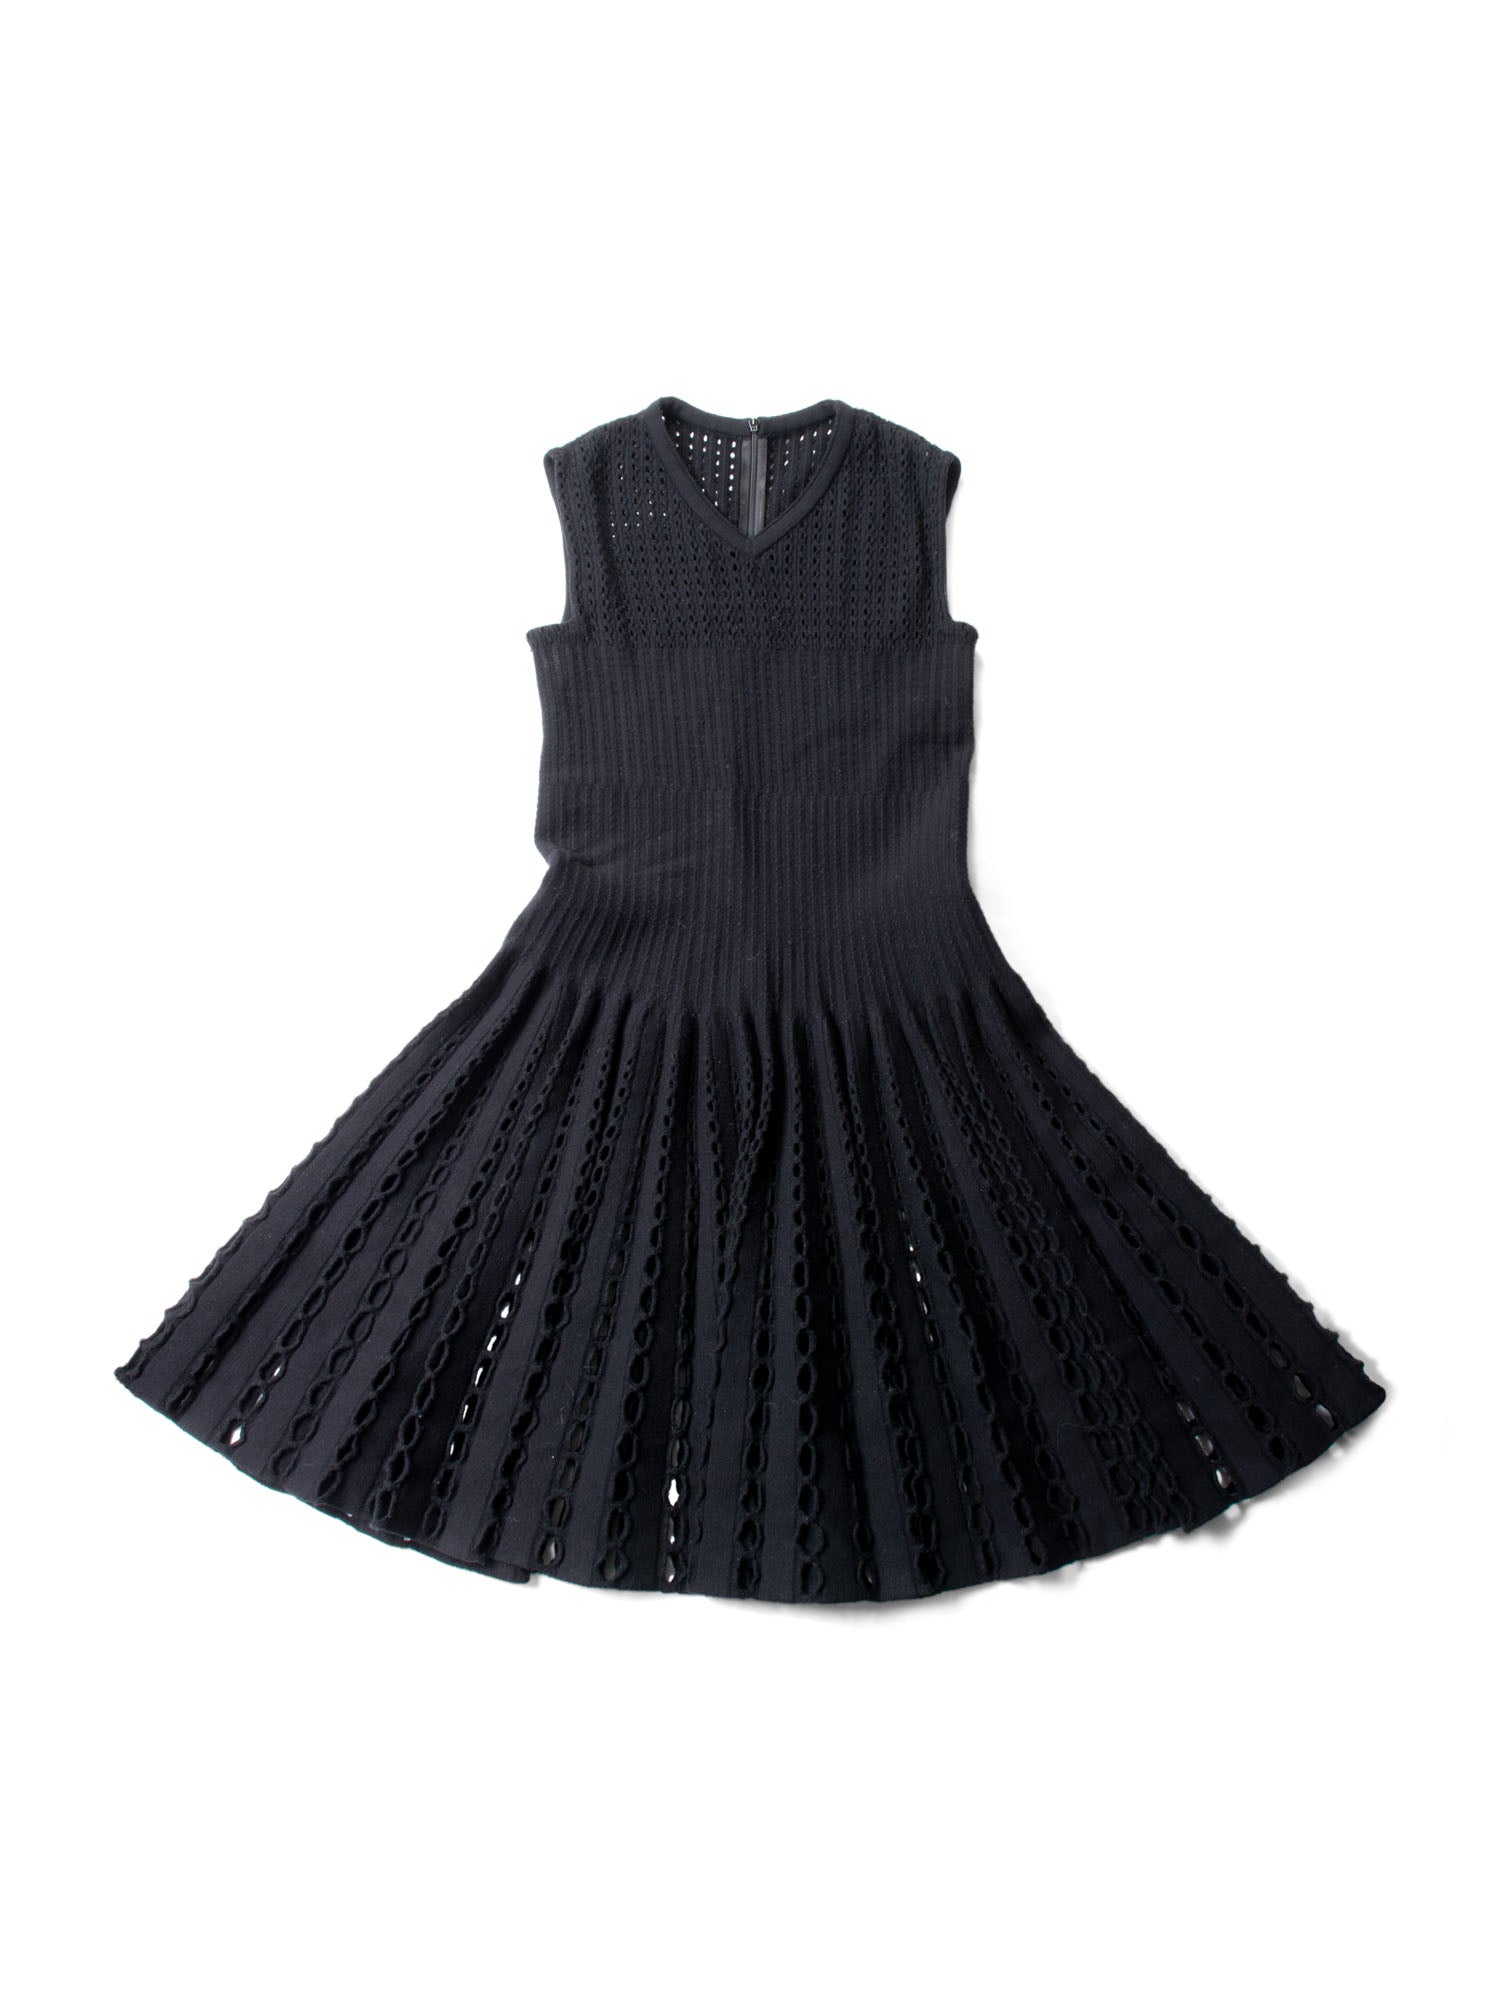 Alaia Knitted Perforated A-Line Pleated Dress Black-designer resale